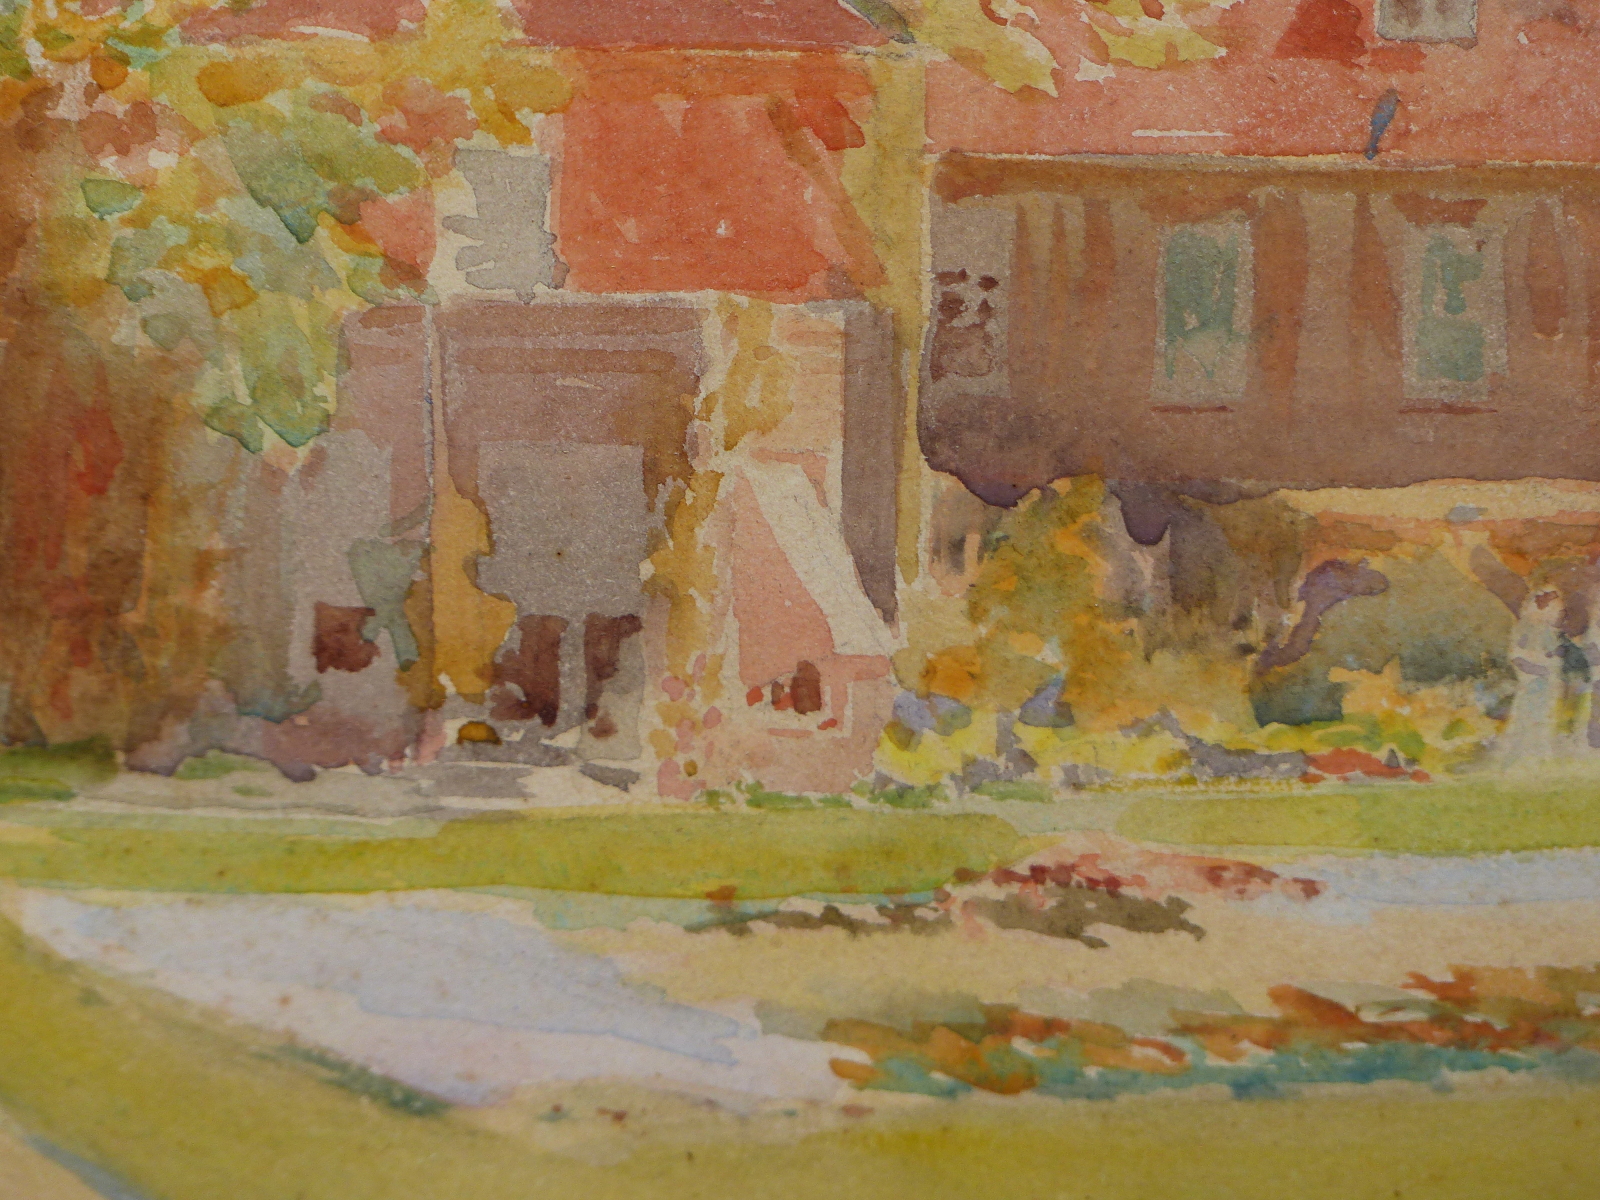 HARRY HINE (1845-1941), DOG LYING IN A SUMMER GARDEN, A HOUSE BEYOND, SIGNED, DATED 1895 AND - Image 4 of 7